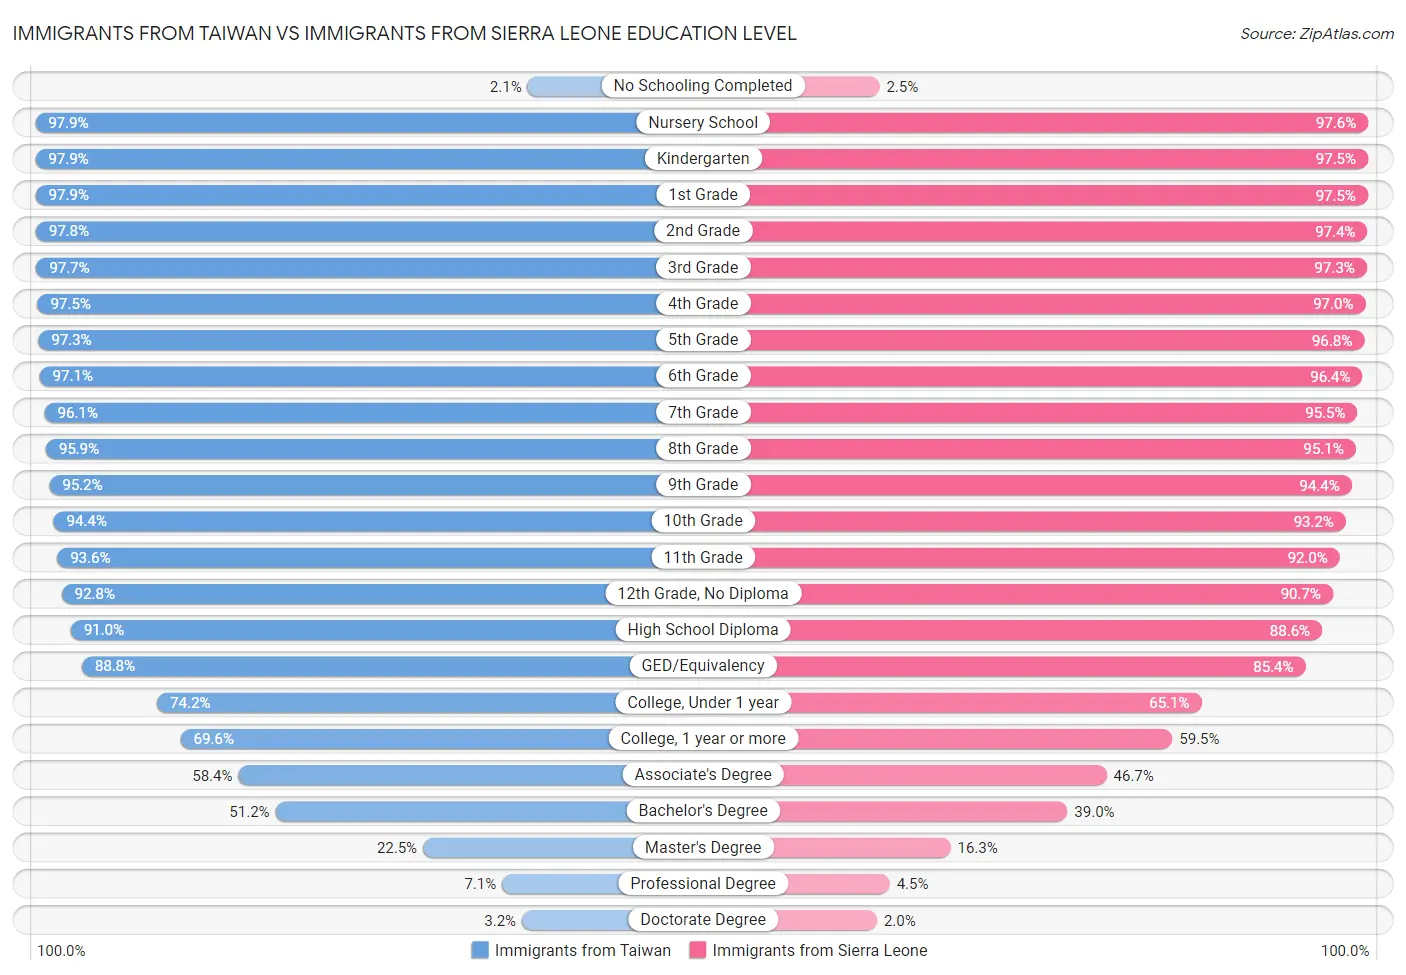 Immigrants from Taiwan vs Immigrants from Sierra Leone Education Level